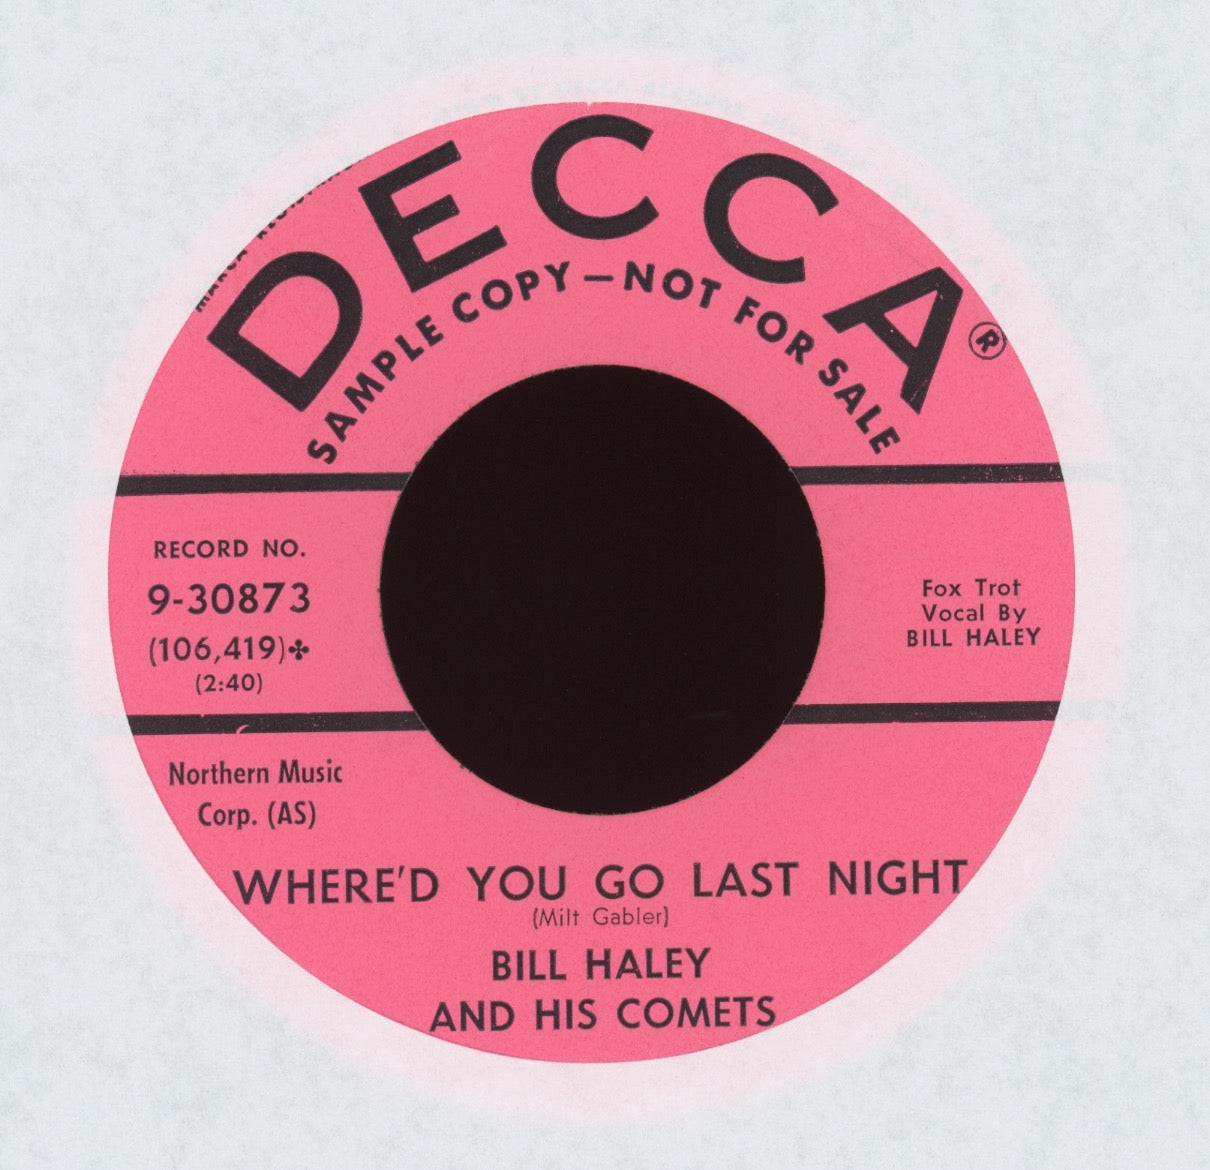 Bill Haley And His Comets - Where'd You Go Last Night on Decca Promo